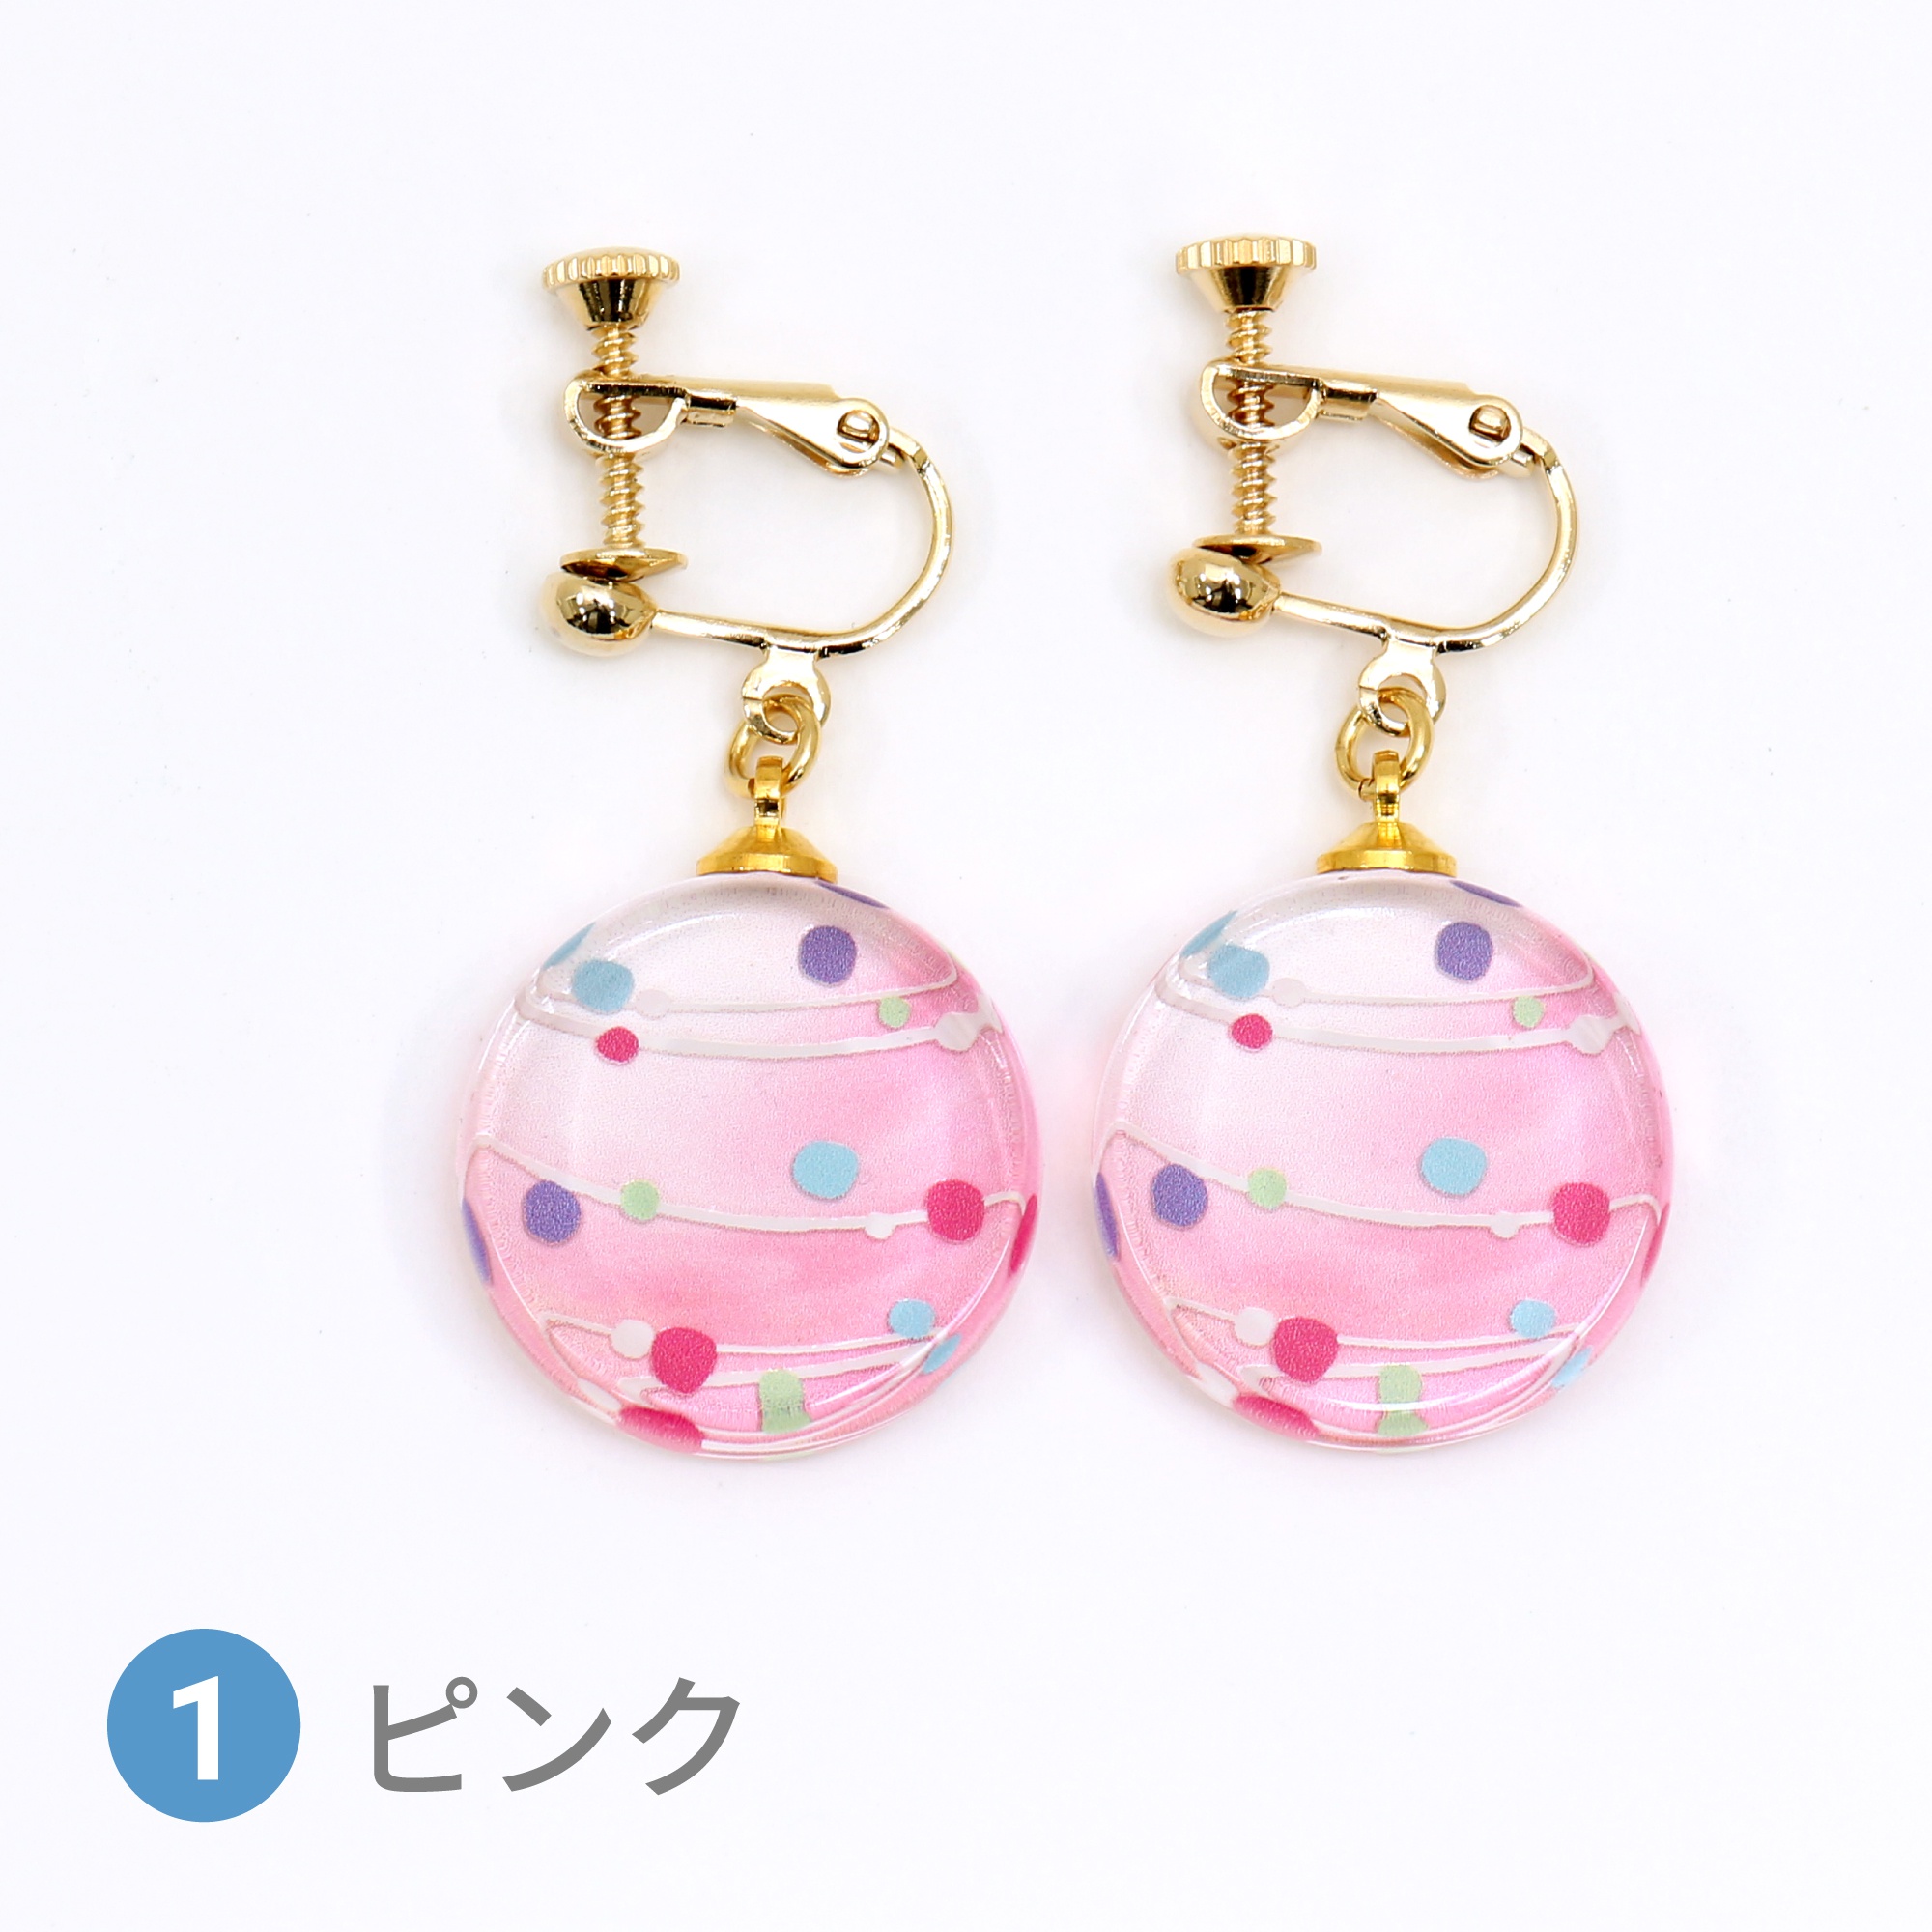 Glass accessories Earring WATER BALLOON pink round shape